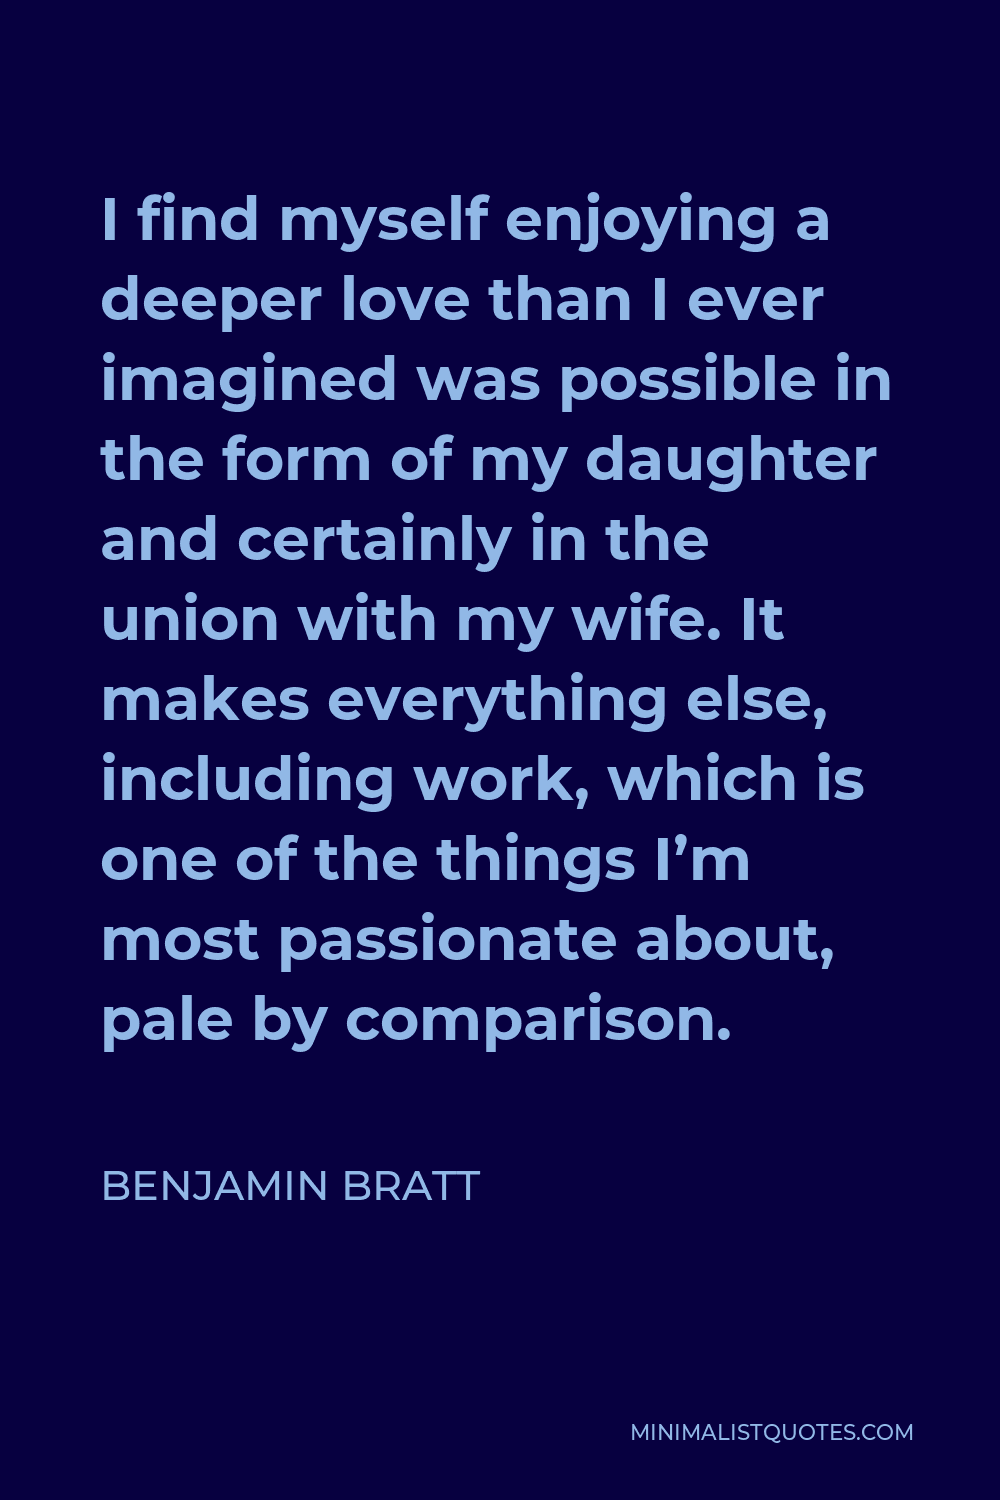 Benjamin Bratt Quote - I find myself enjoying a deeper love than I ever imagined was possible in the form of my daughter and certainly in the union with my wife. It makes everything else, including work, which is one of the things I’m most passionate about, pale by comparison.